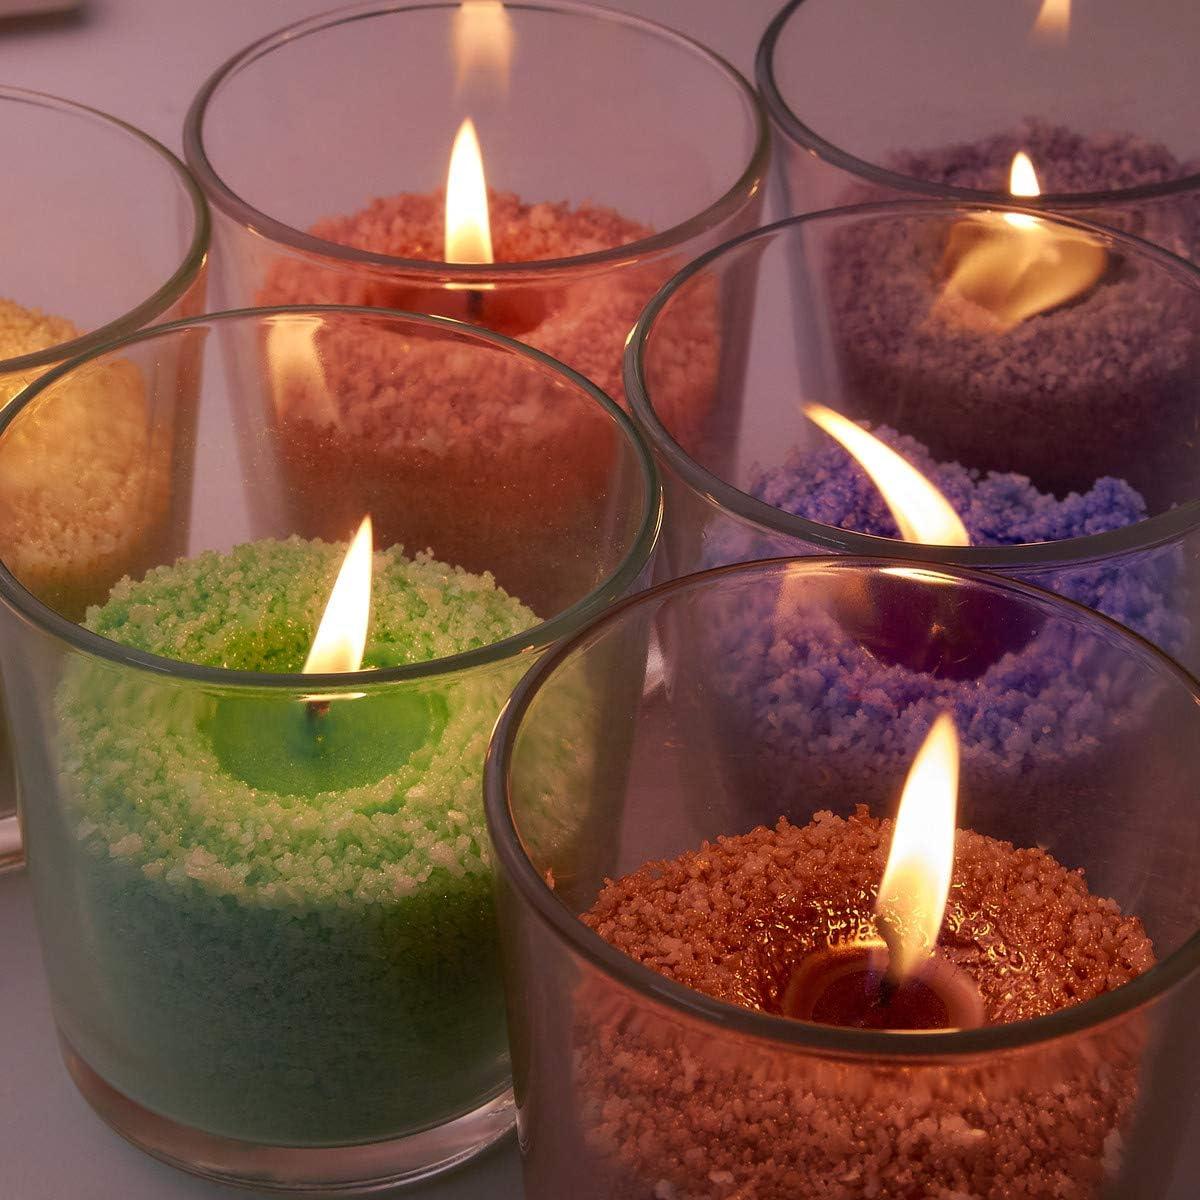 Which Paraffin Wax Is Best For Candle Making